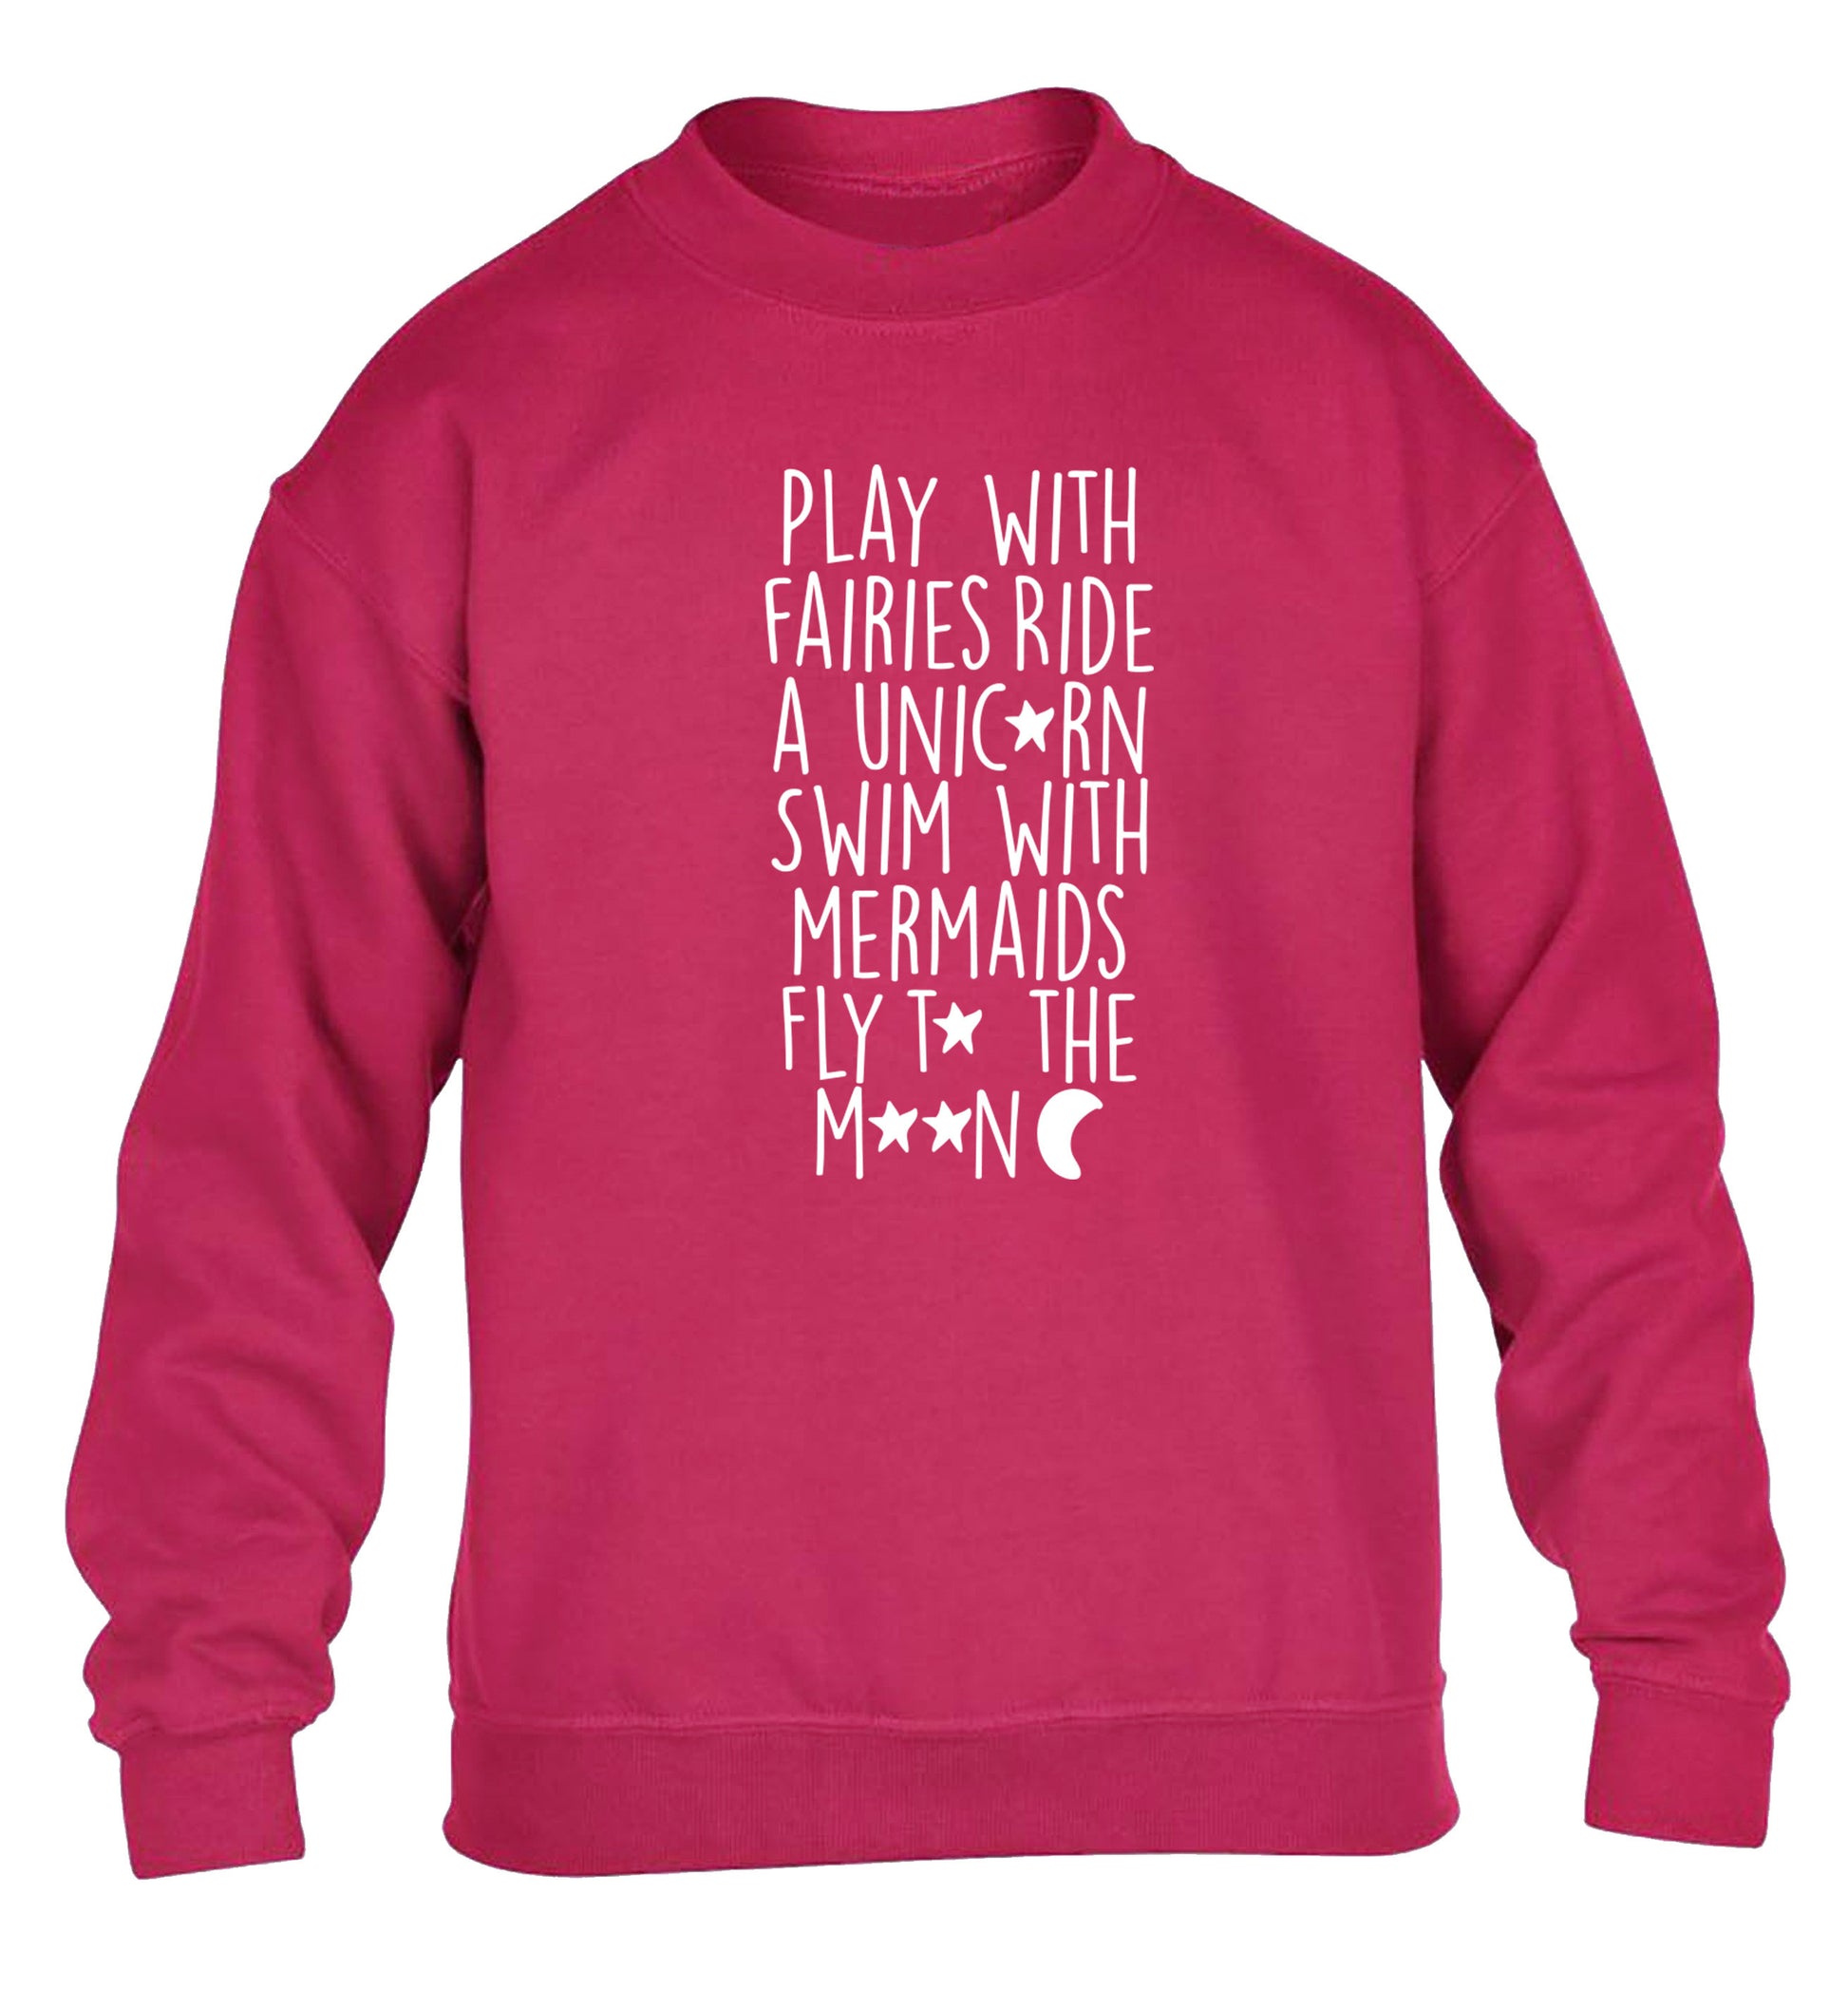 Play with fairies ride a unicorn swim with mermaids fly to the moon children's pink sweater 12-14 Years